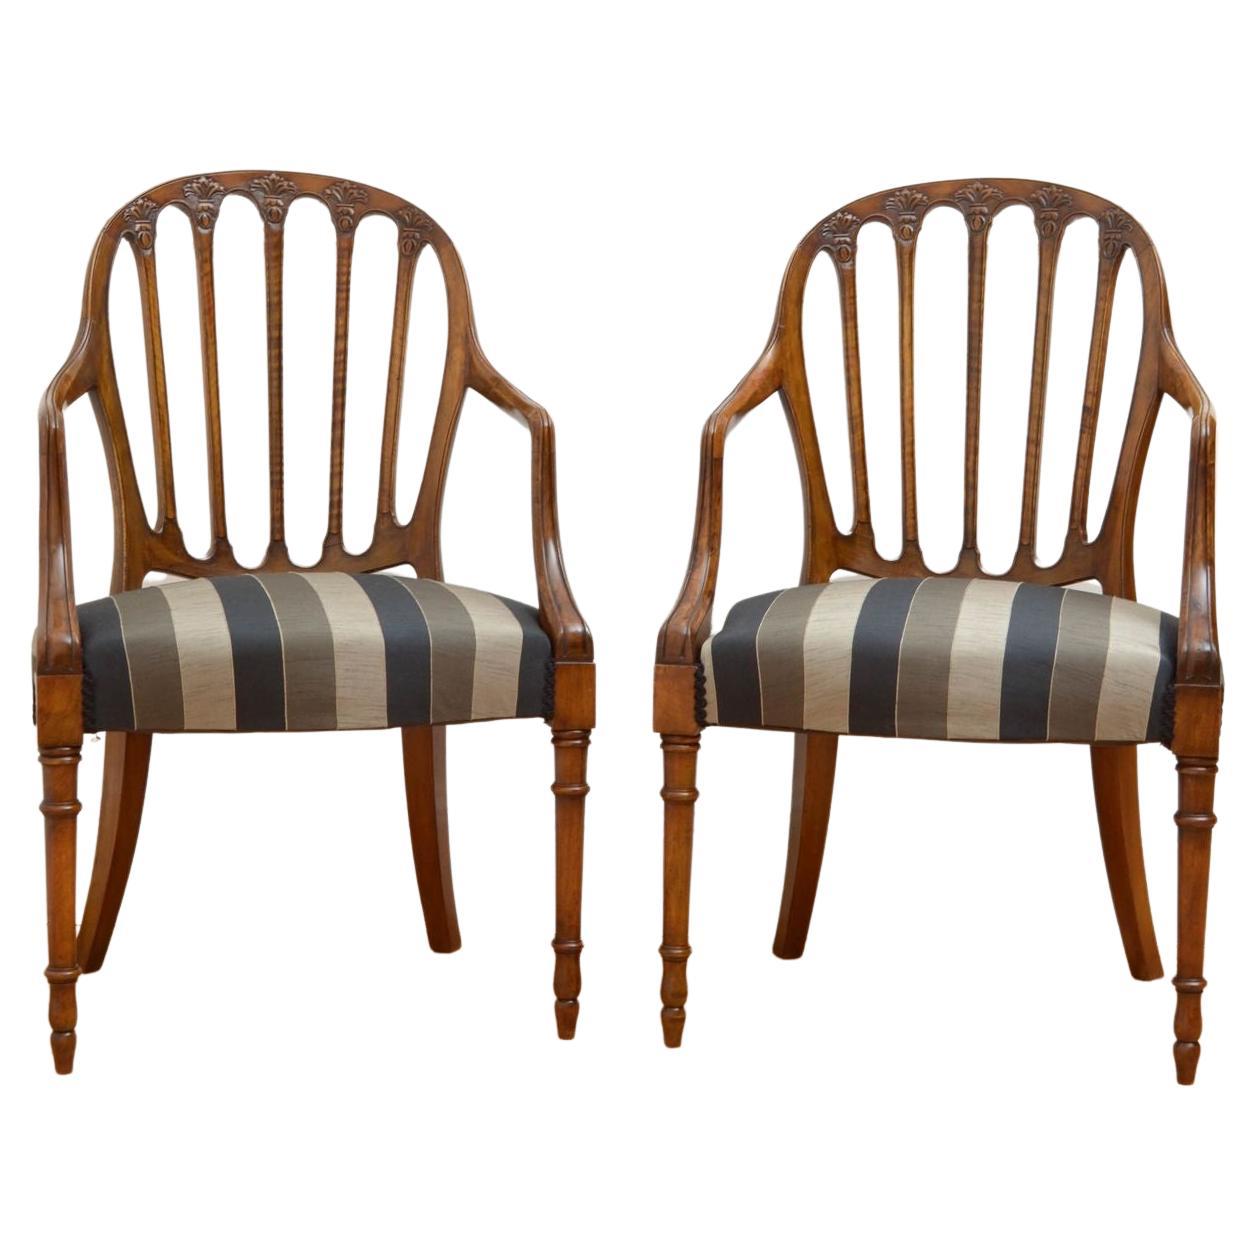 Pair of Antique Carver Chairs